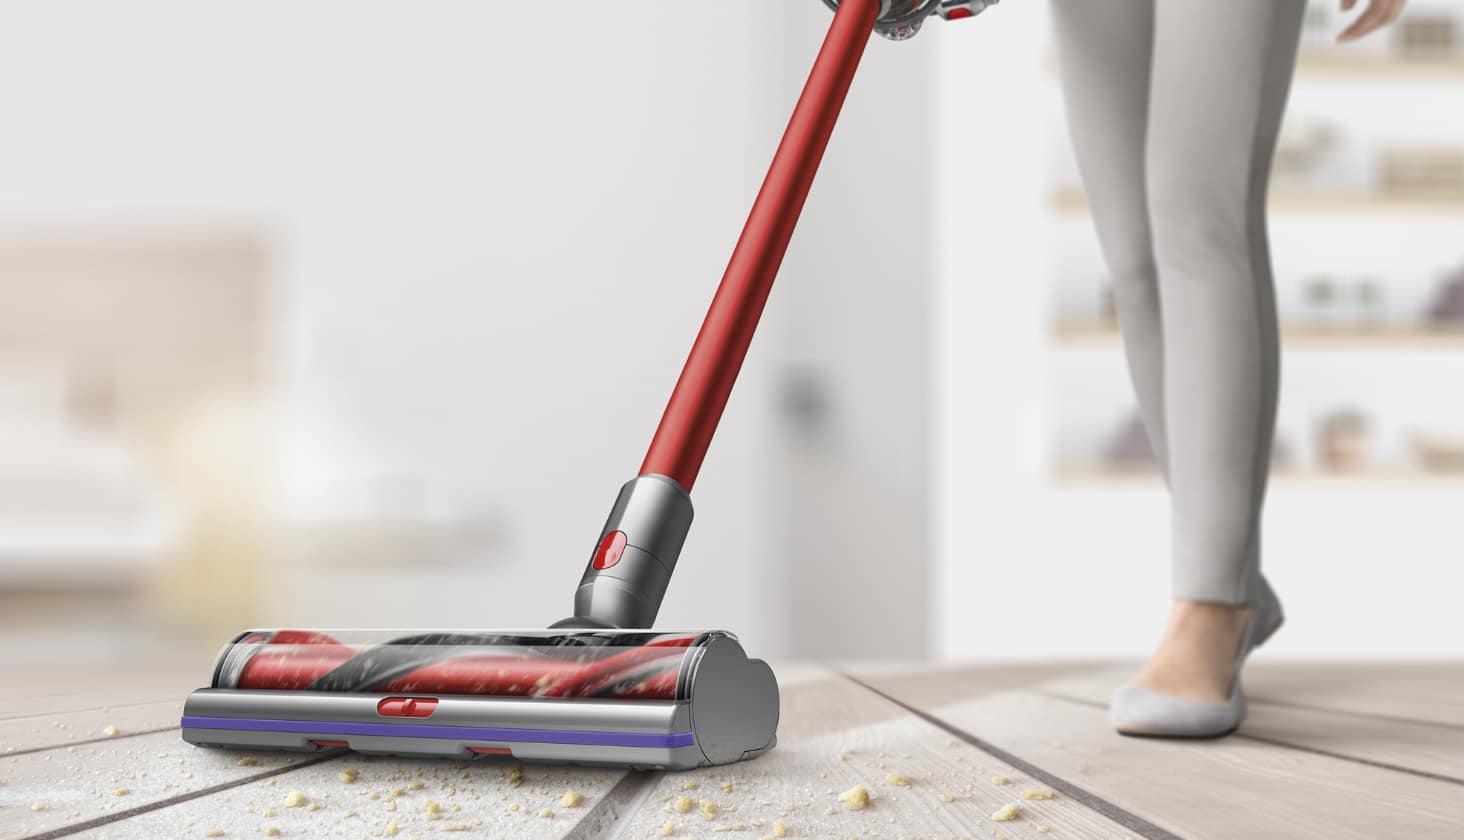  Woman uses a stick vacuum to clean up crumbs on a living room rug.